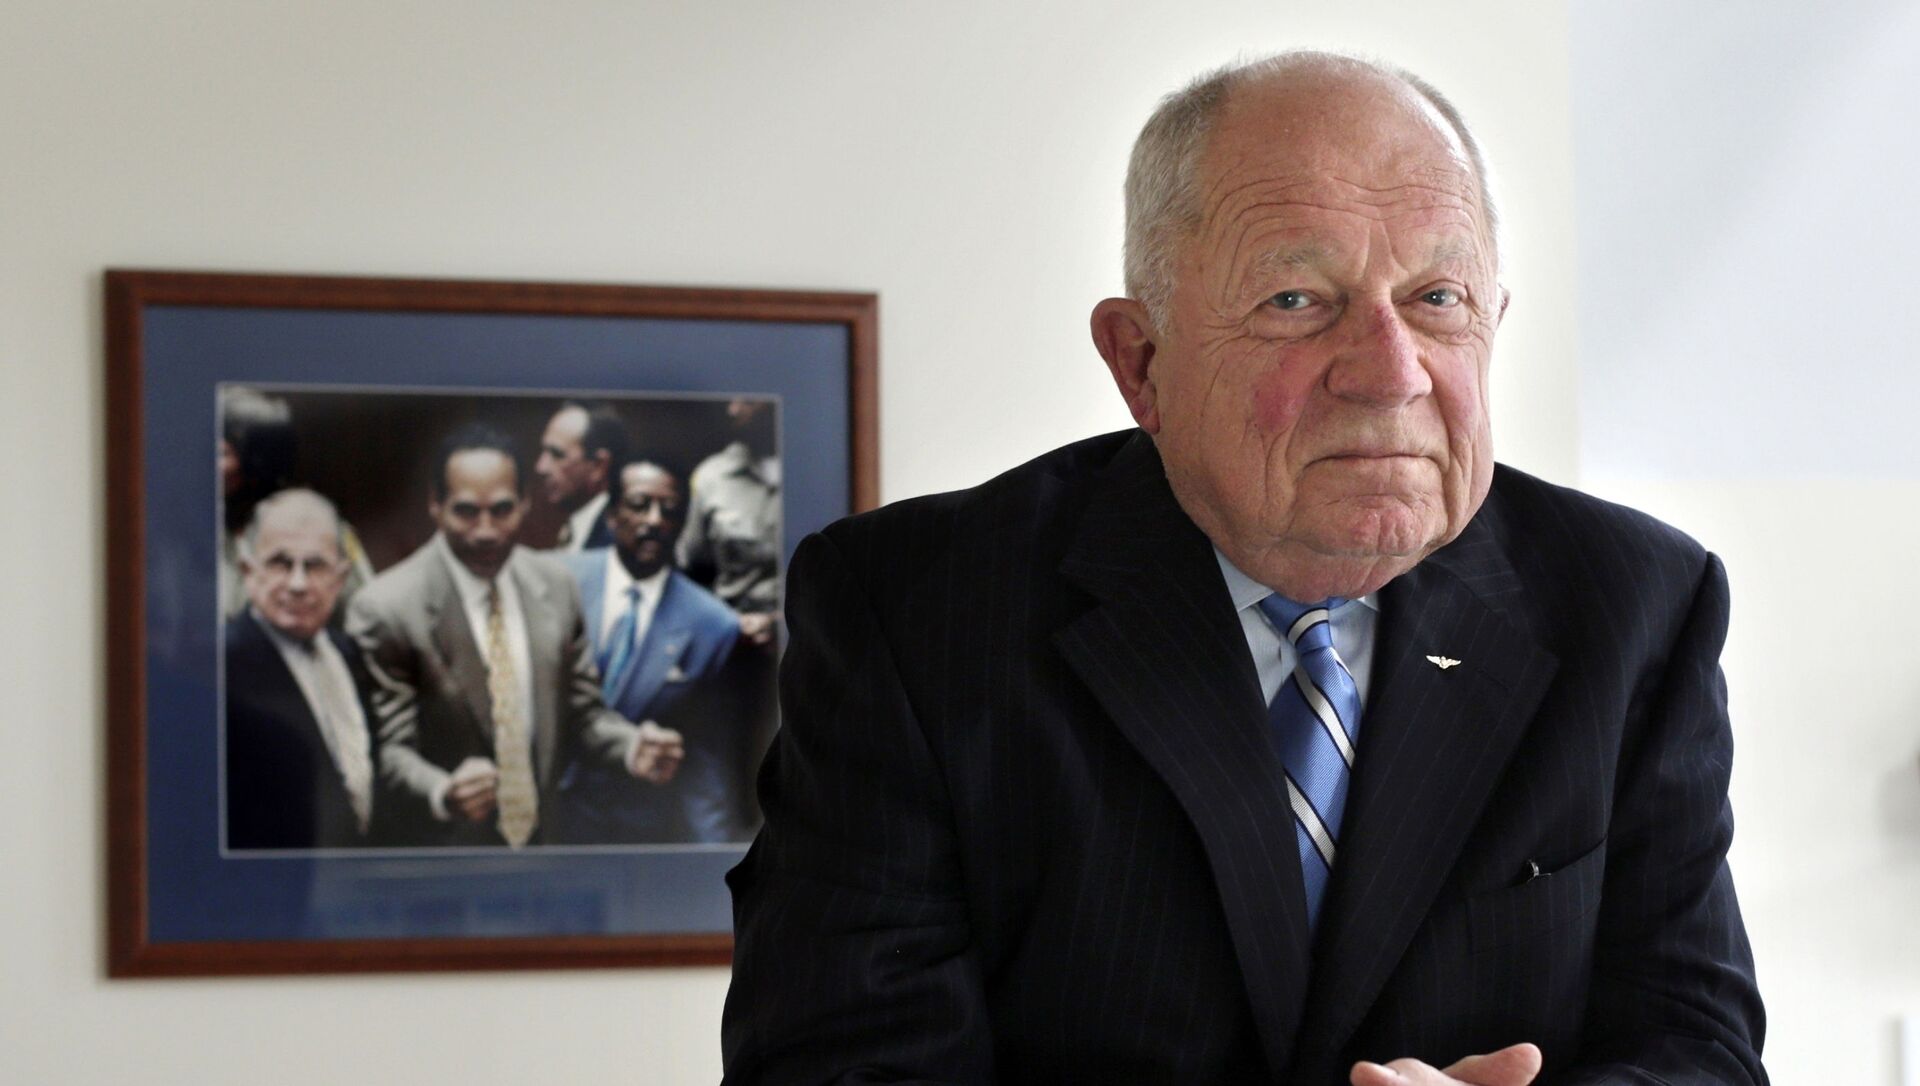 FILE - In this May 22, 2014, file photo, famed defense attorney F. Lee Bailey poses in his office in Yarmouth, Maine. Bailey, the celebrity attorney who defended O.J. Simpson, Patricia Hearst and the alleged Boston Strangler, but whose legal career halted when he was disbarred in two states, has died, a former colleague confirmed Thursday, June 3, 2021. He was 87.  - Sputnik International, 1920, 03.06.2021